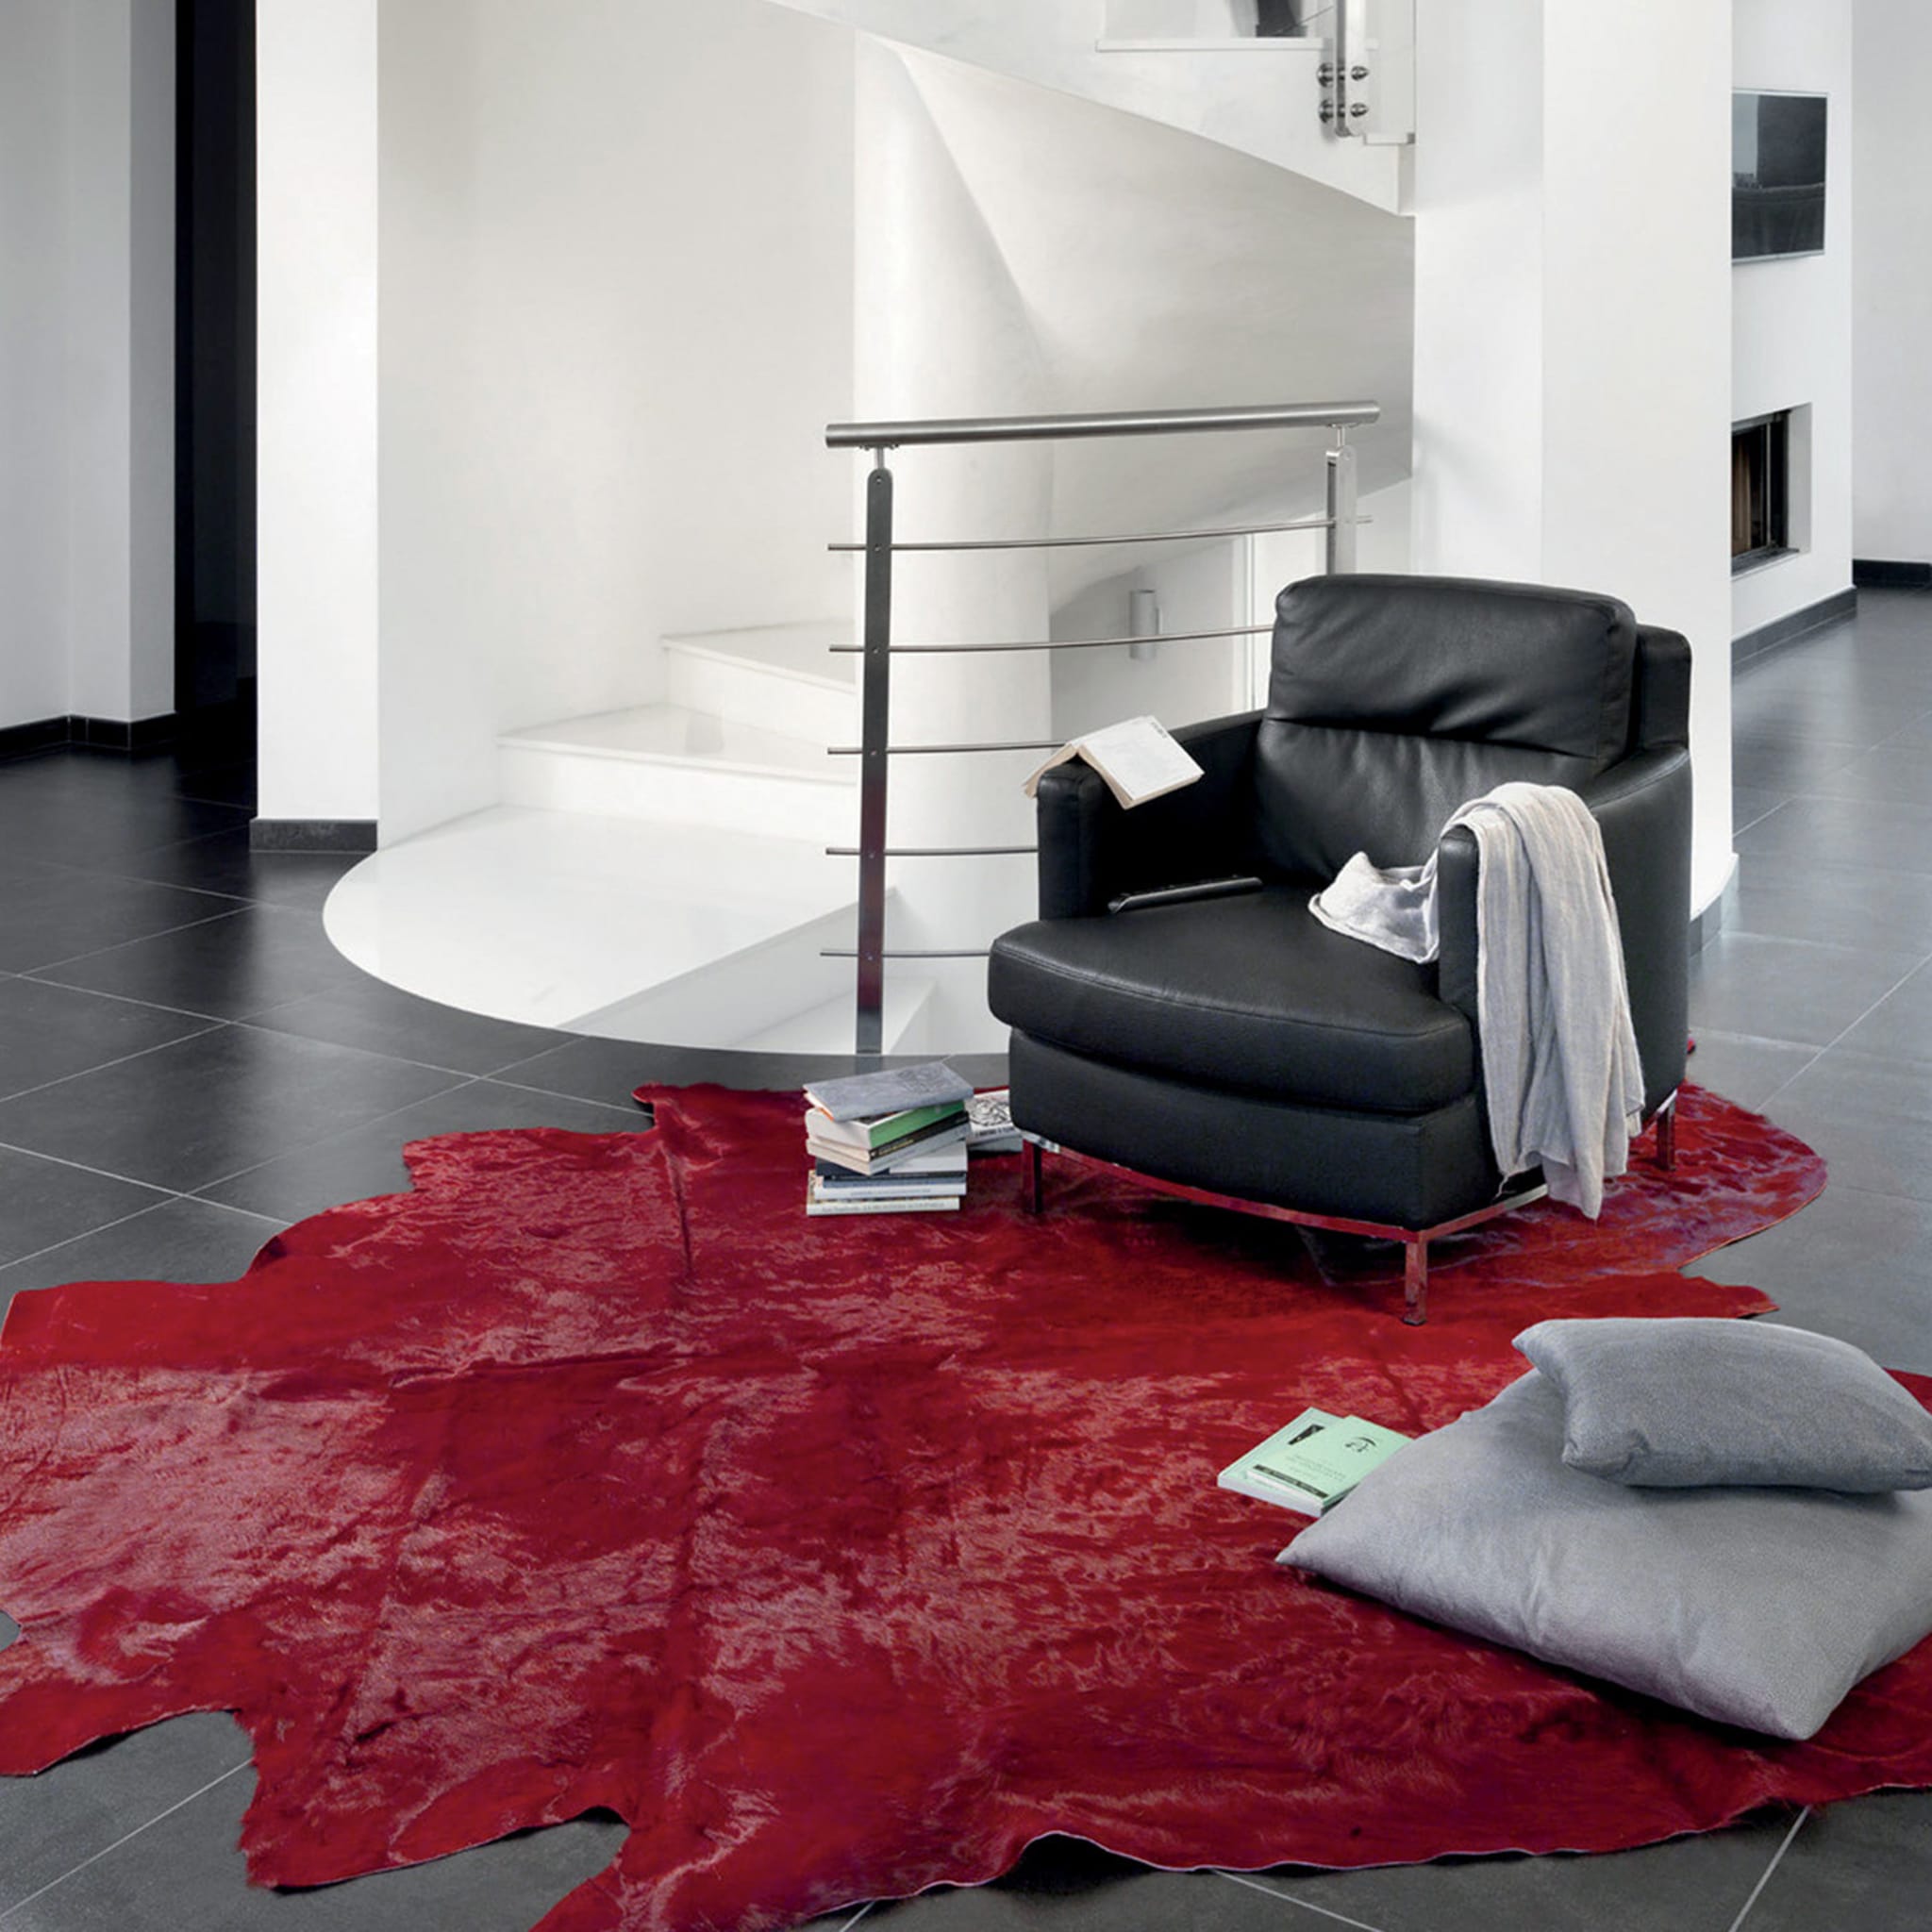 Natural Tanner Red Colored Leather Rug - Alternative view 1